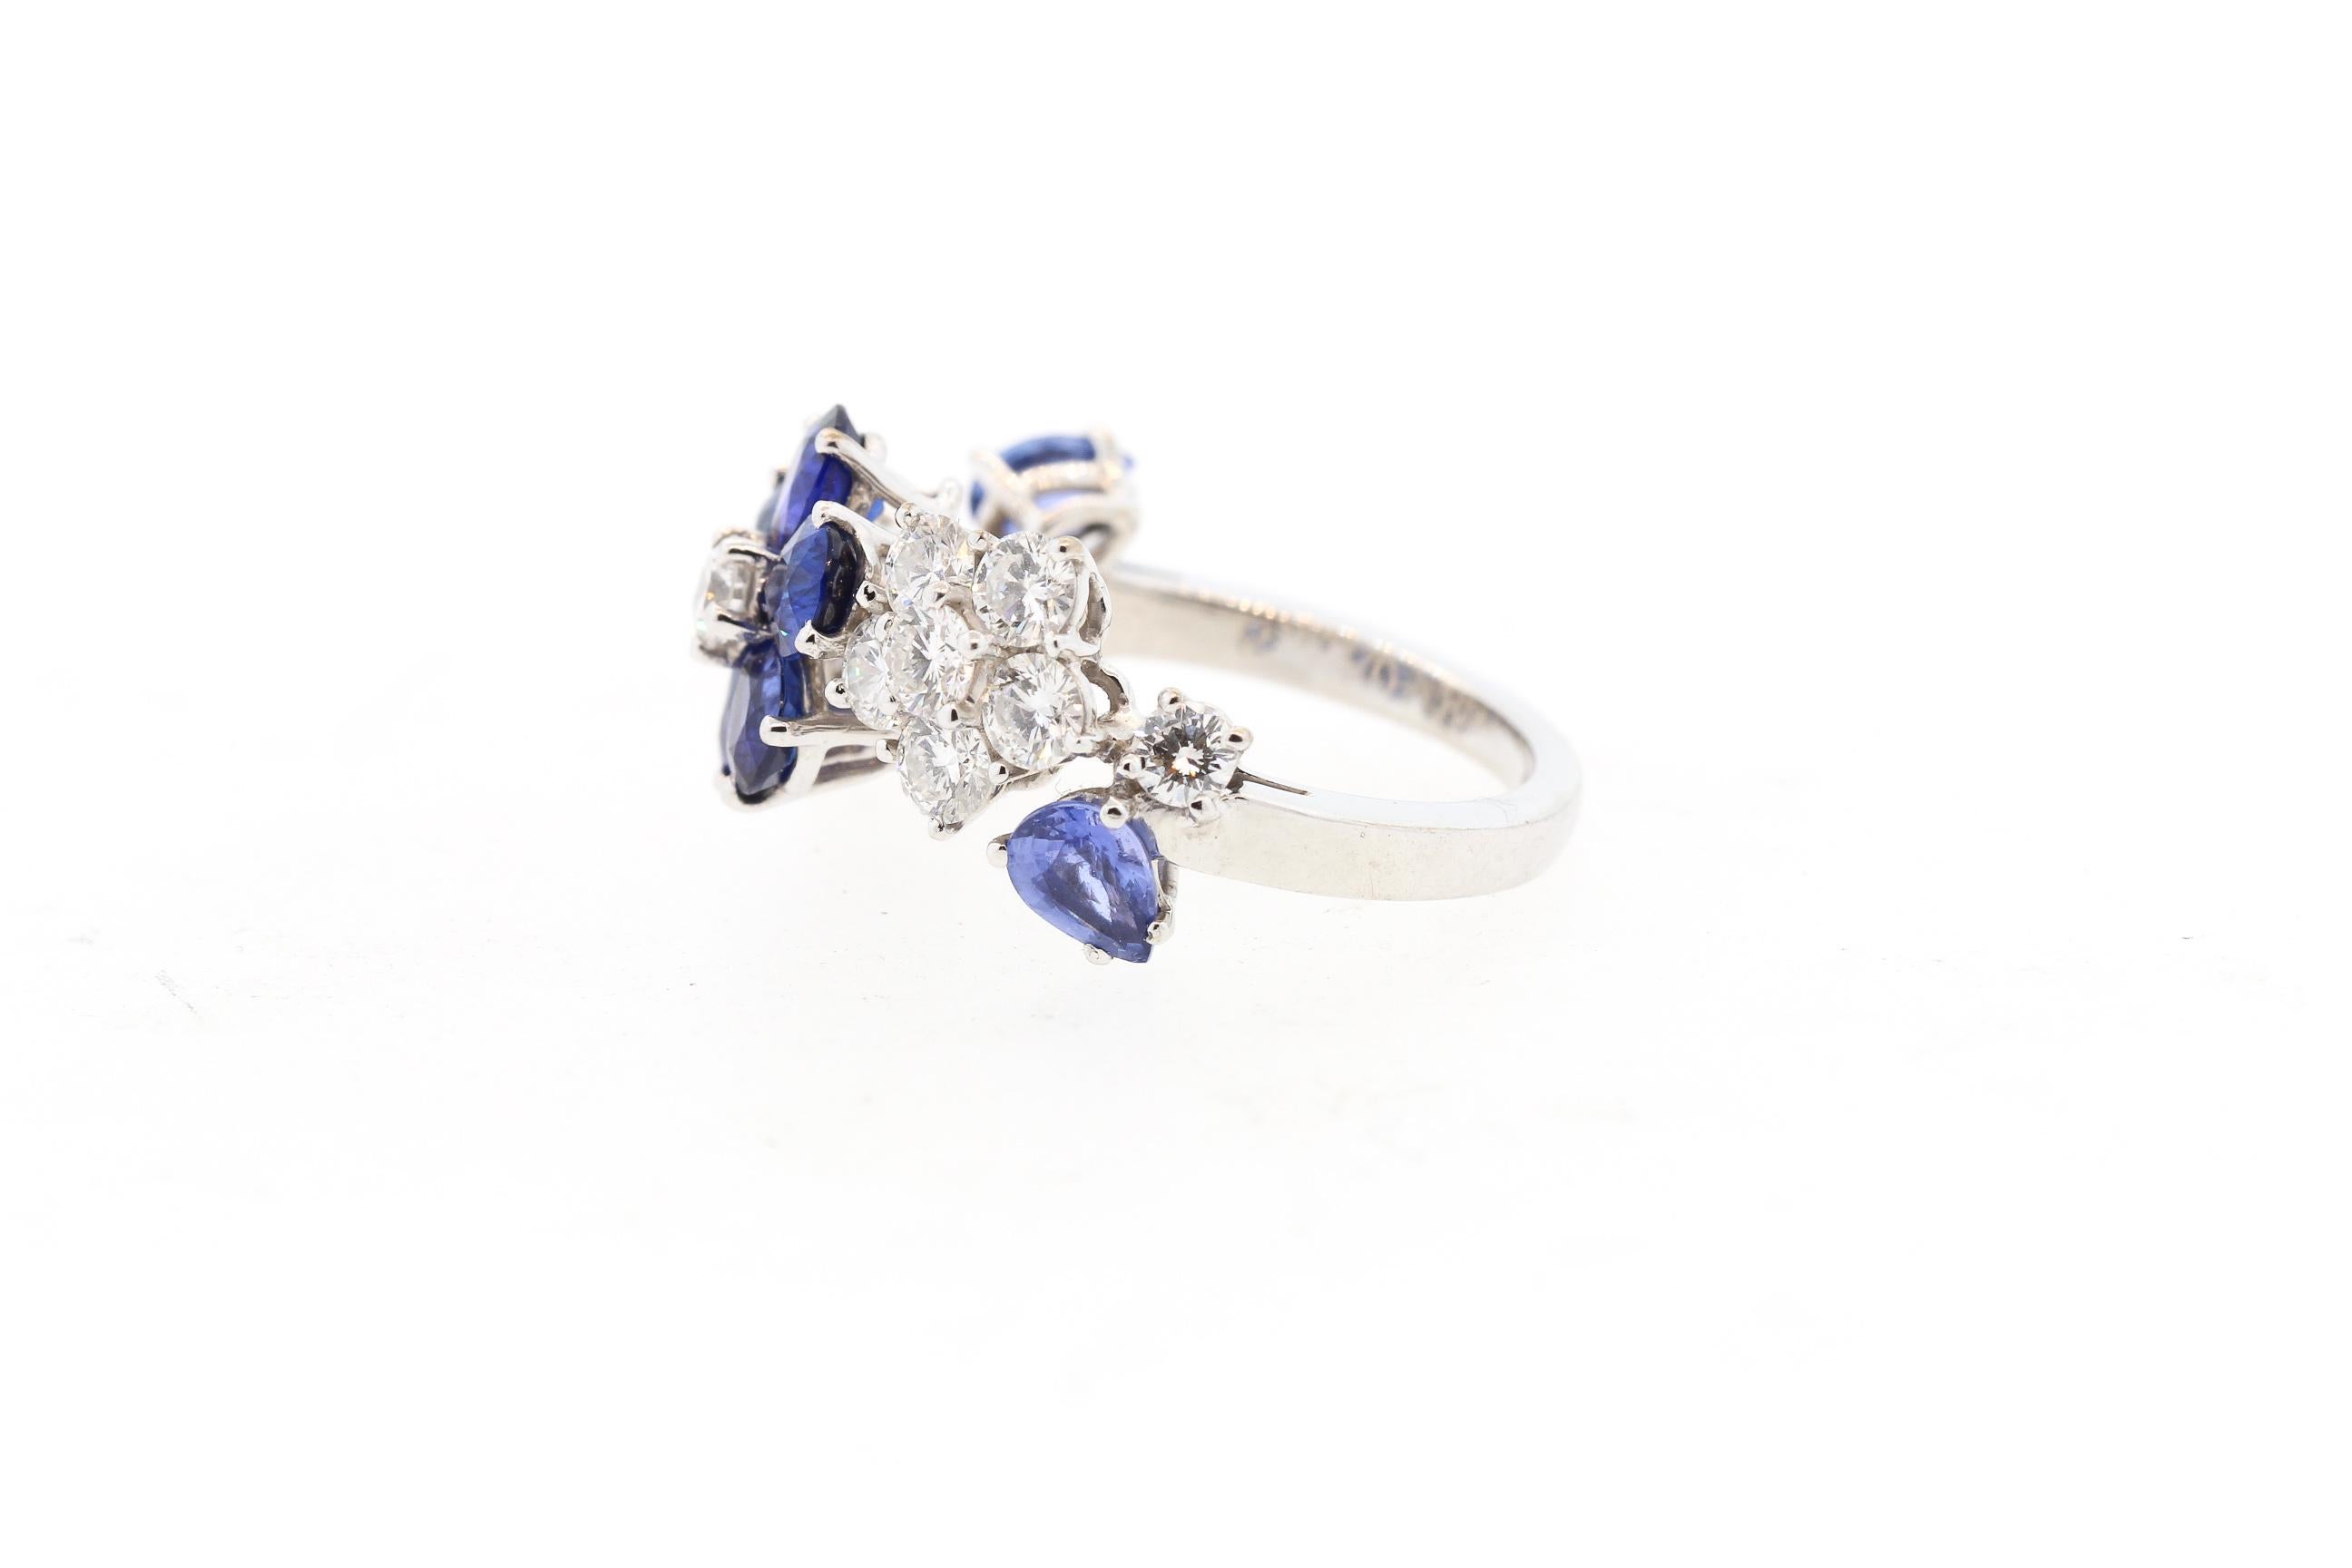 A beautiful refined sapphire and diamond flower ring made by Van Cleef & Arpels. With French hallmarks, this signed and numbered ring is from the elegant Folie des Prés High Jewelry collection by Van Cleef & Arpels. The ring is made in 18k white